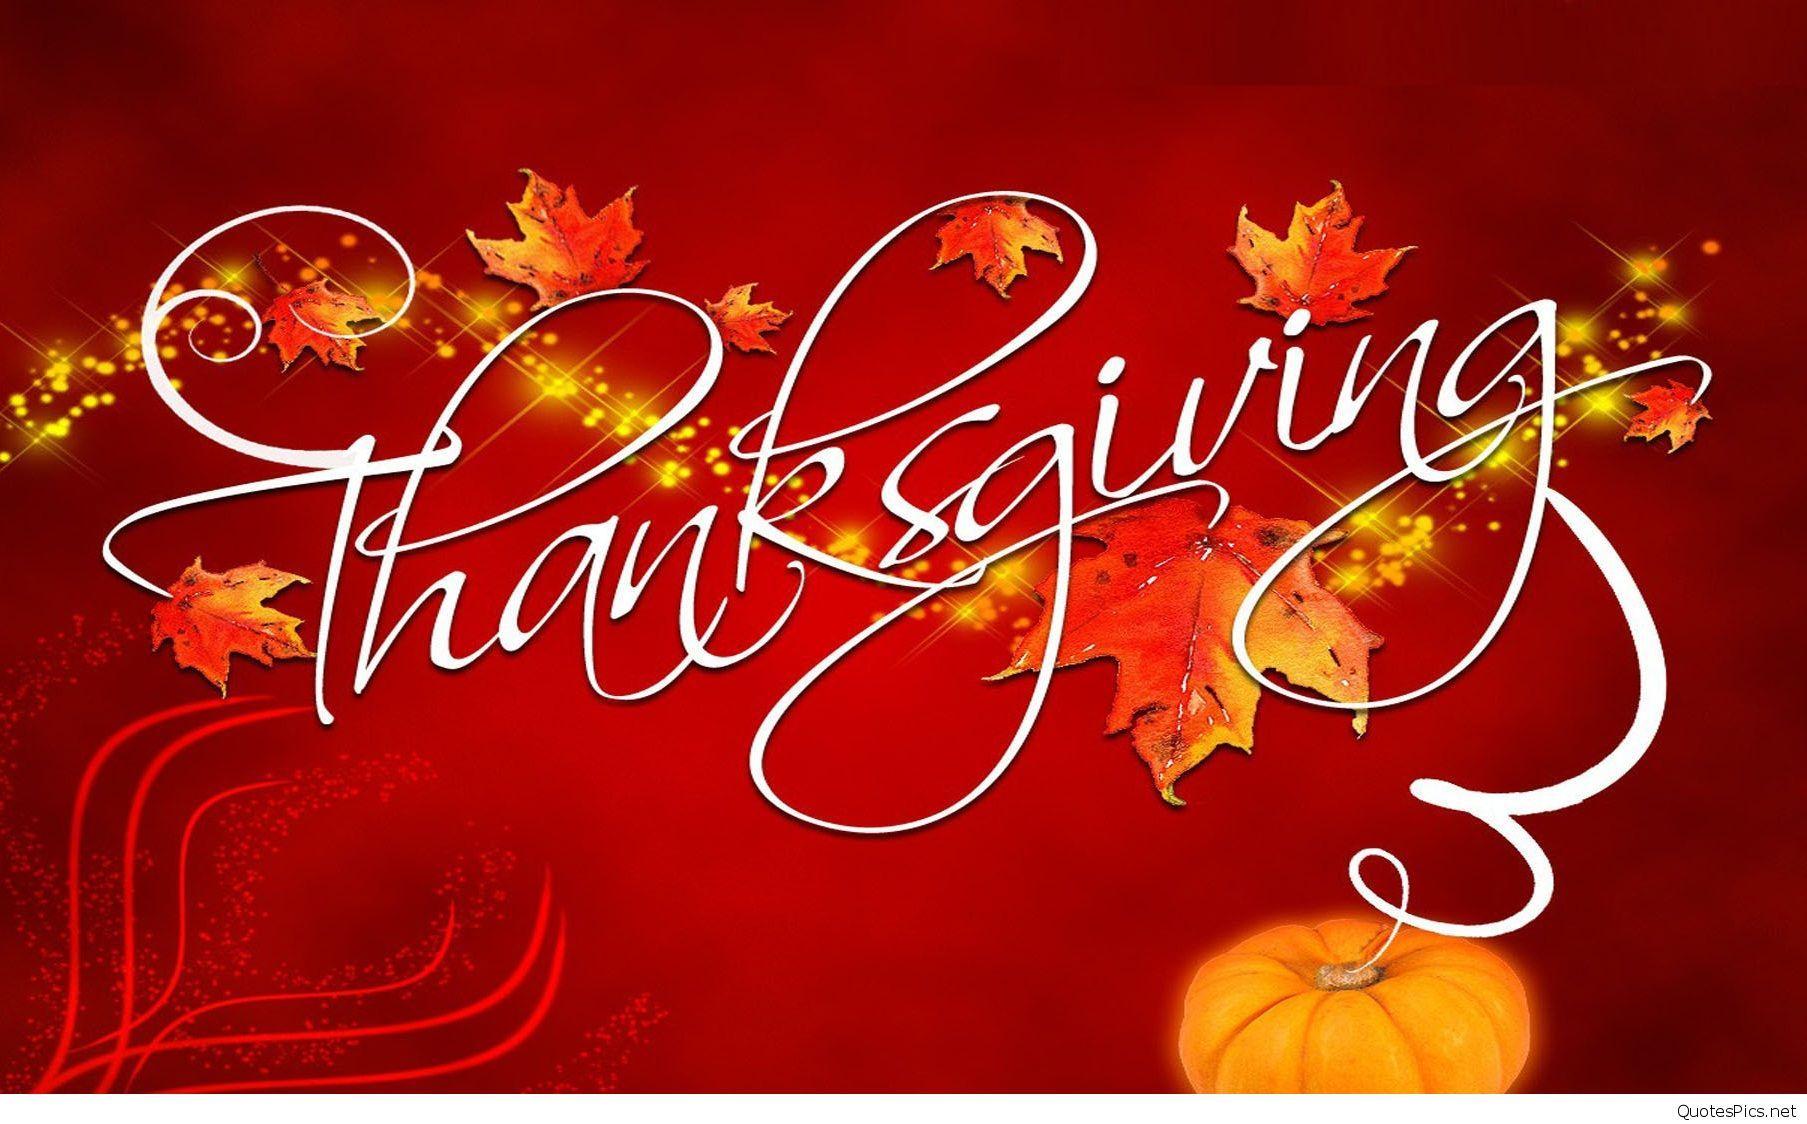 Cute Happy Thanksgiving wallpapers quotes, image 2016 2017